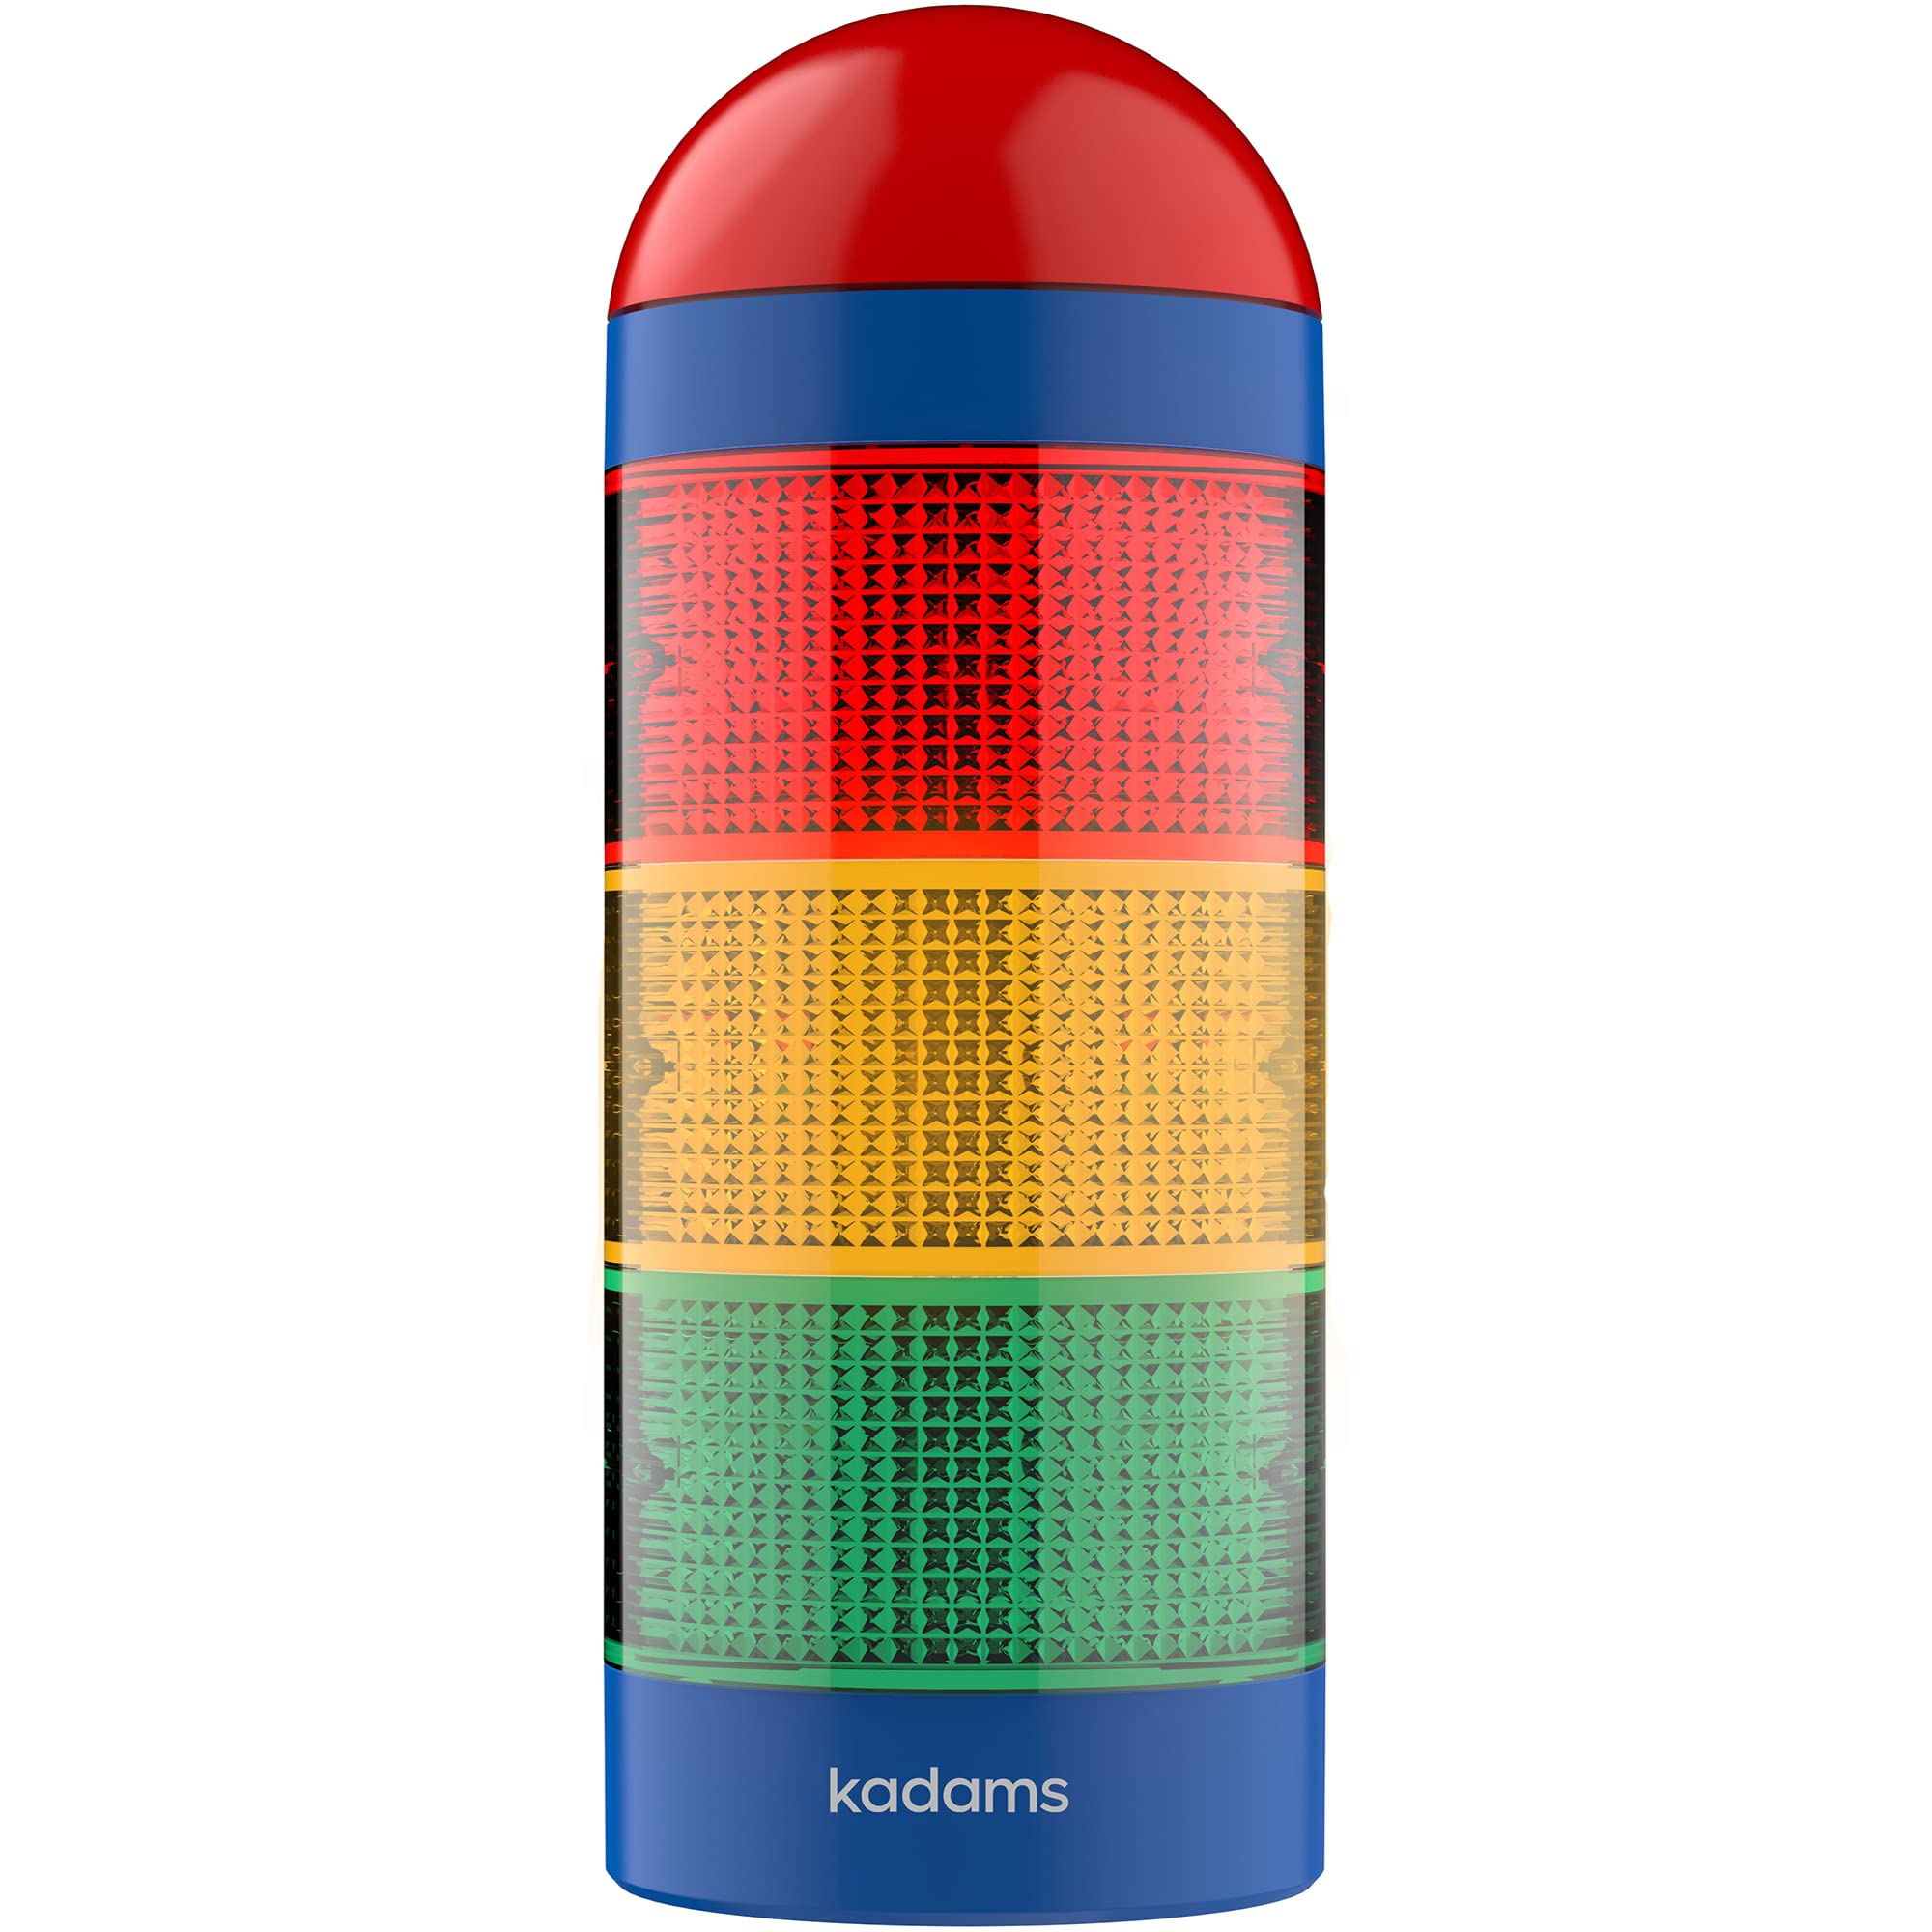 Kadams Visual Timer for Kids with Audio Alarm - Traffic Light Alarm for Kids, Teachers, Classroom, Home, Time Management Tool, 24hr Countdown, Pause Function, Auto Timer - Blue